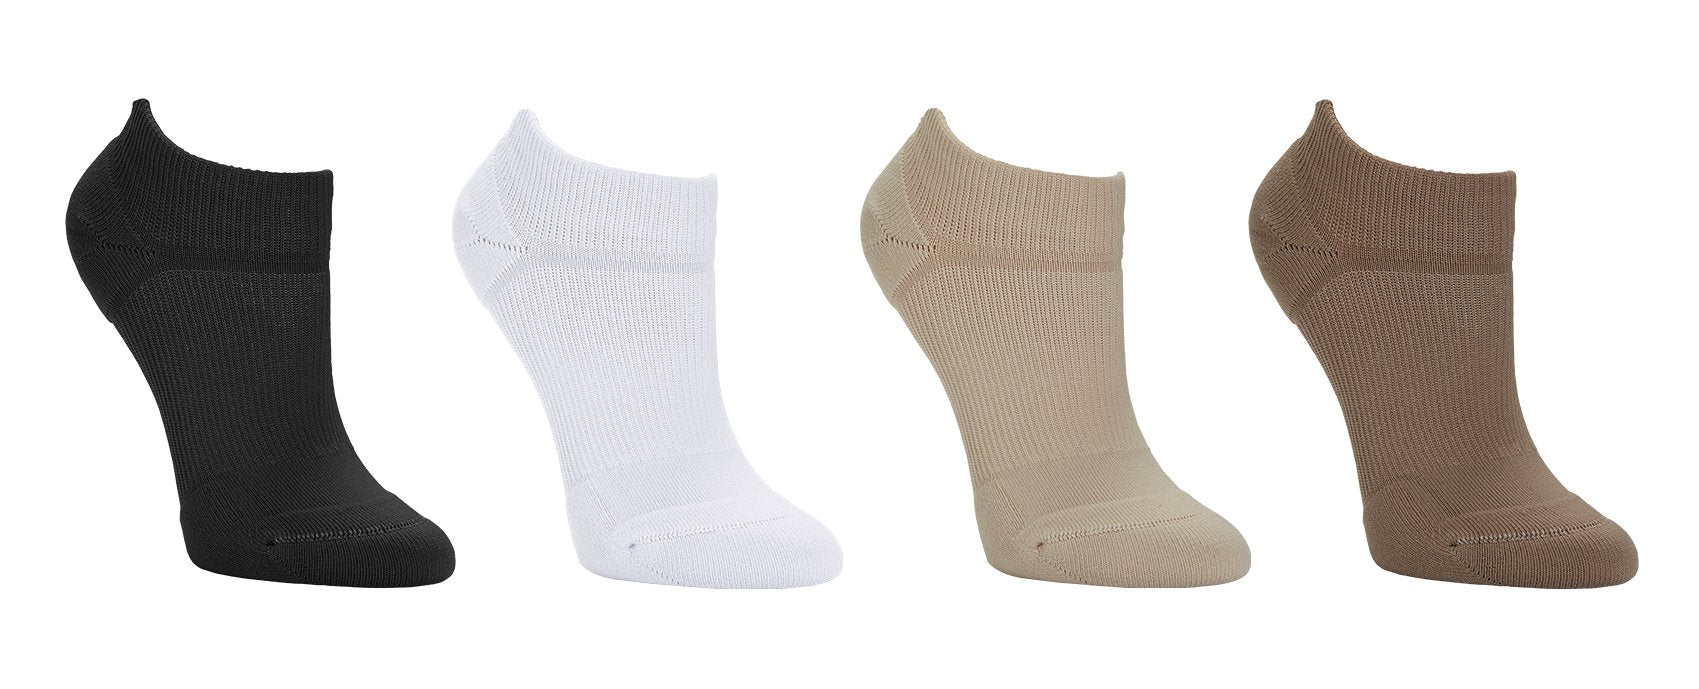 Apolla - Socks - Mid Calf Recovery - THE INIFINITE SHOCK with